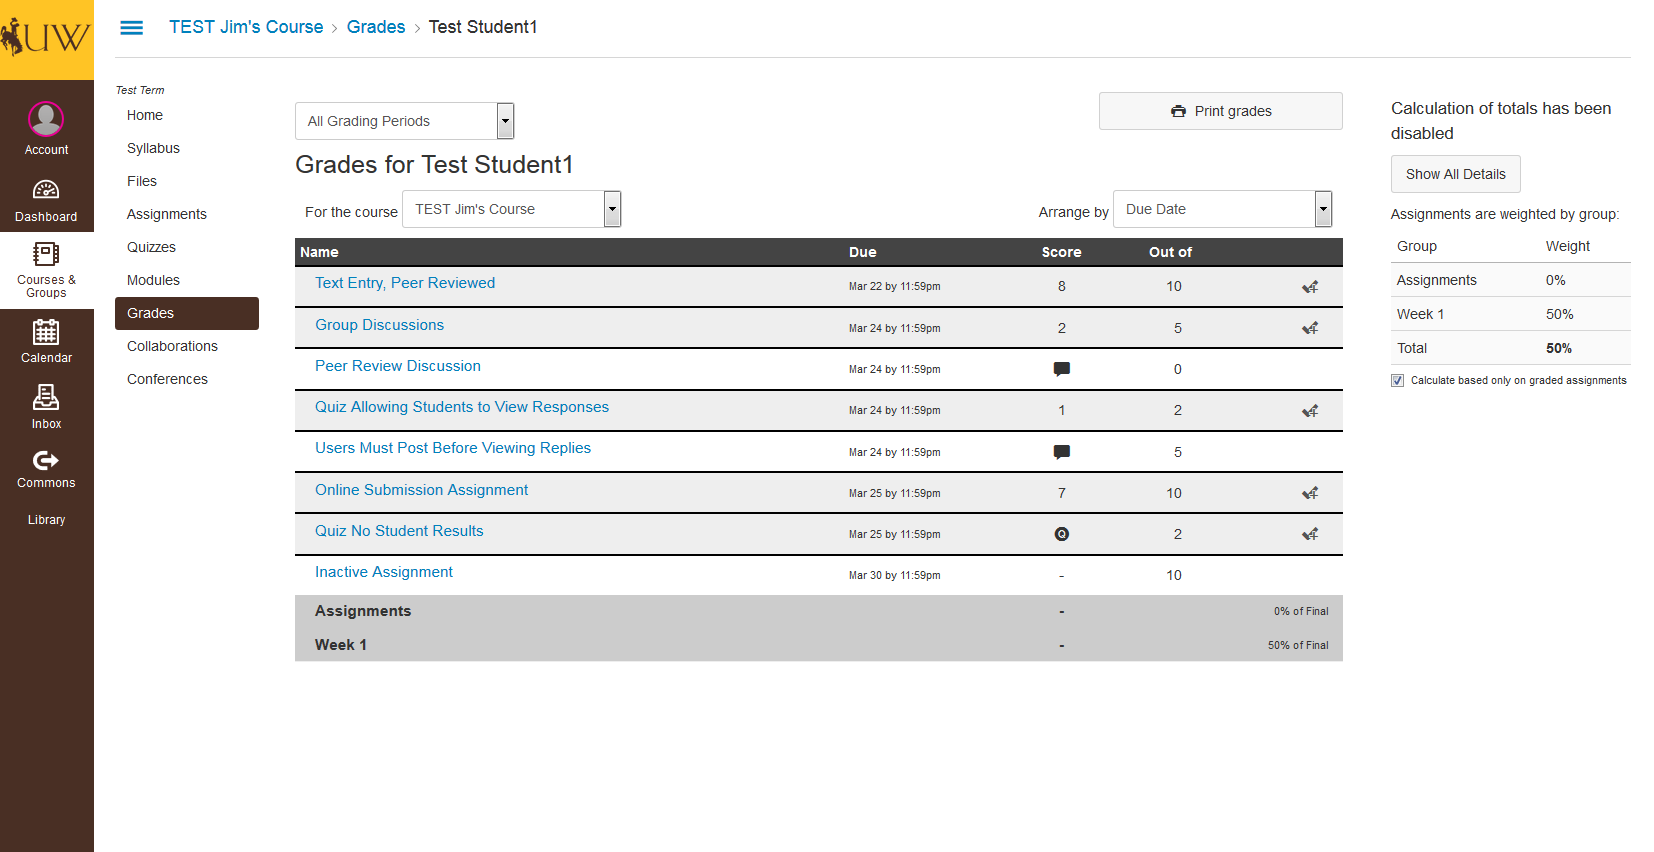 image showing advisor's view of grades tool in wyocourses